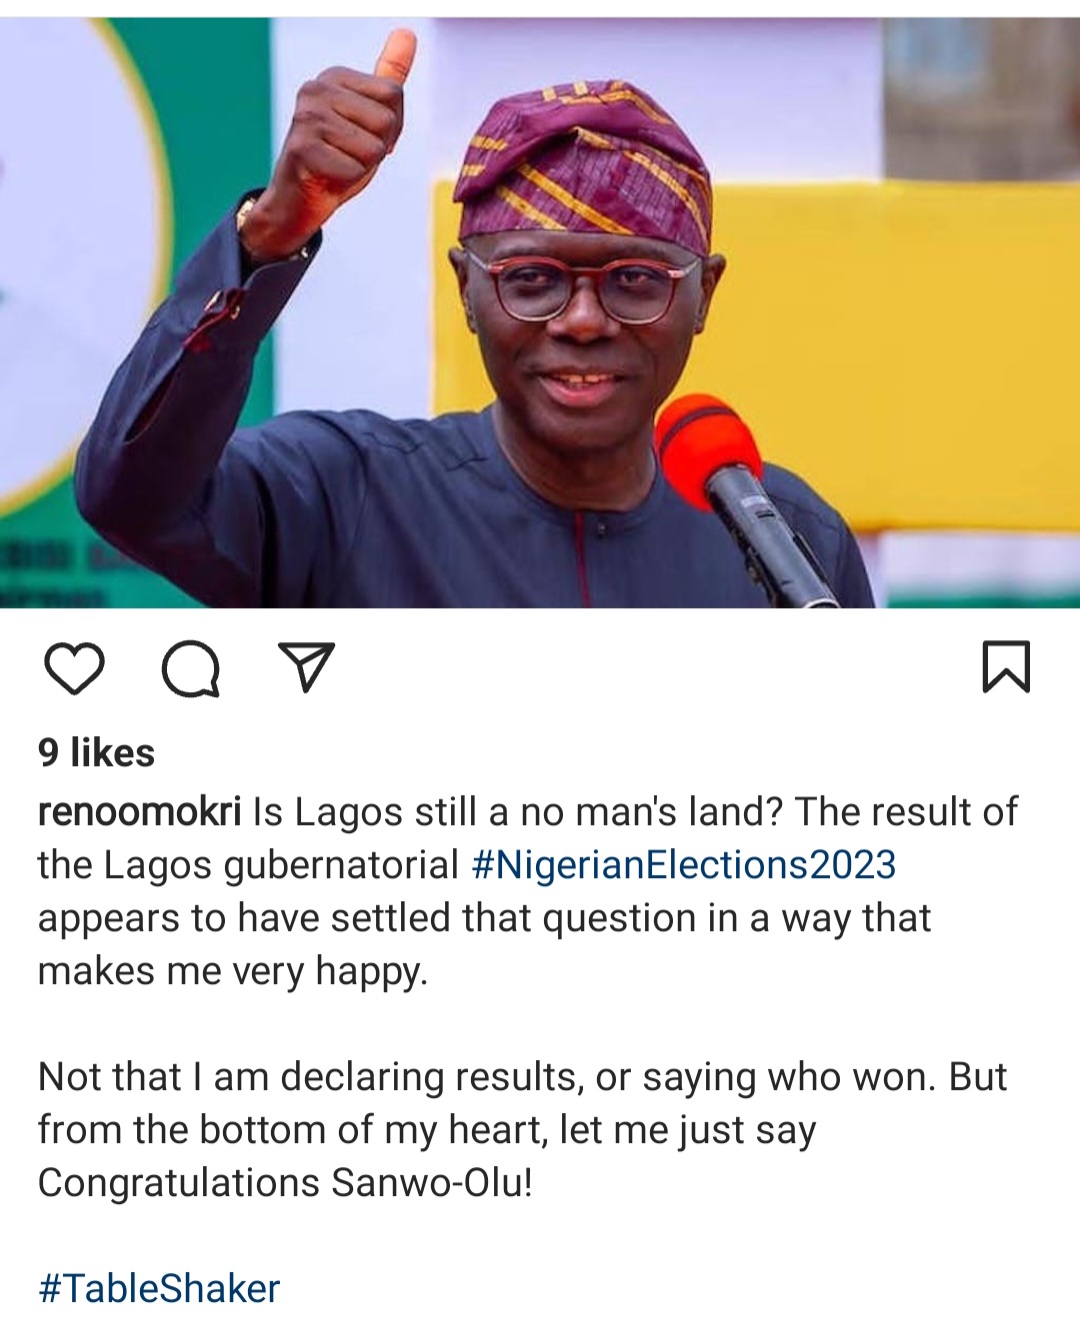 "Is Lagos still a no man's land?" Reno Omokri asks as he says the result so far from the Lagos governorship election makes him "very happy"